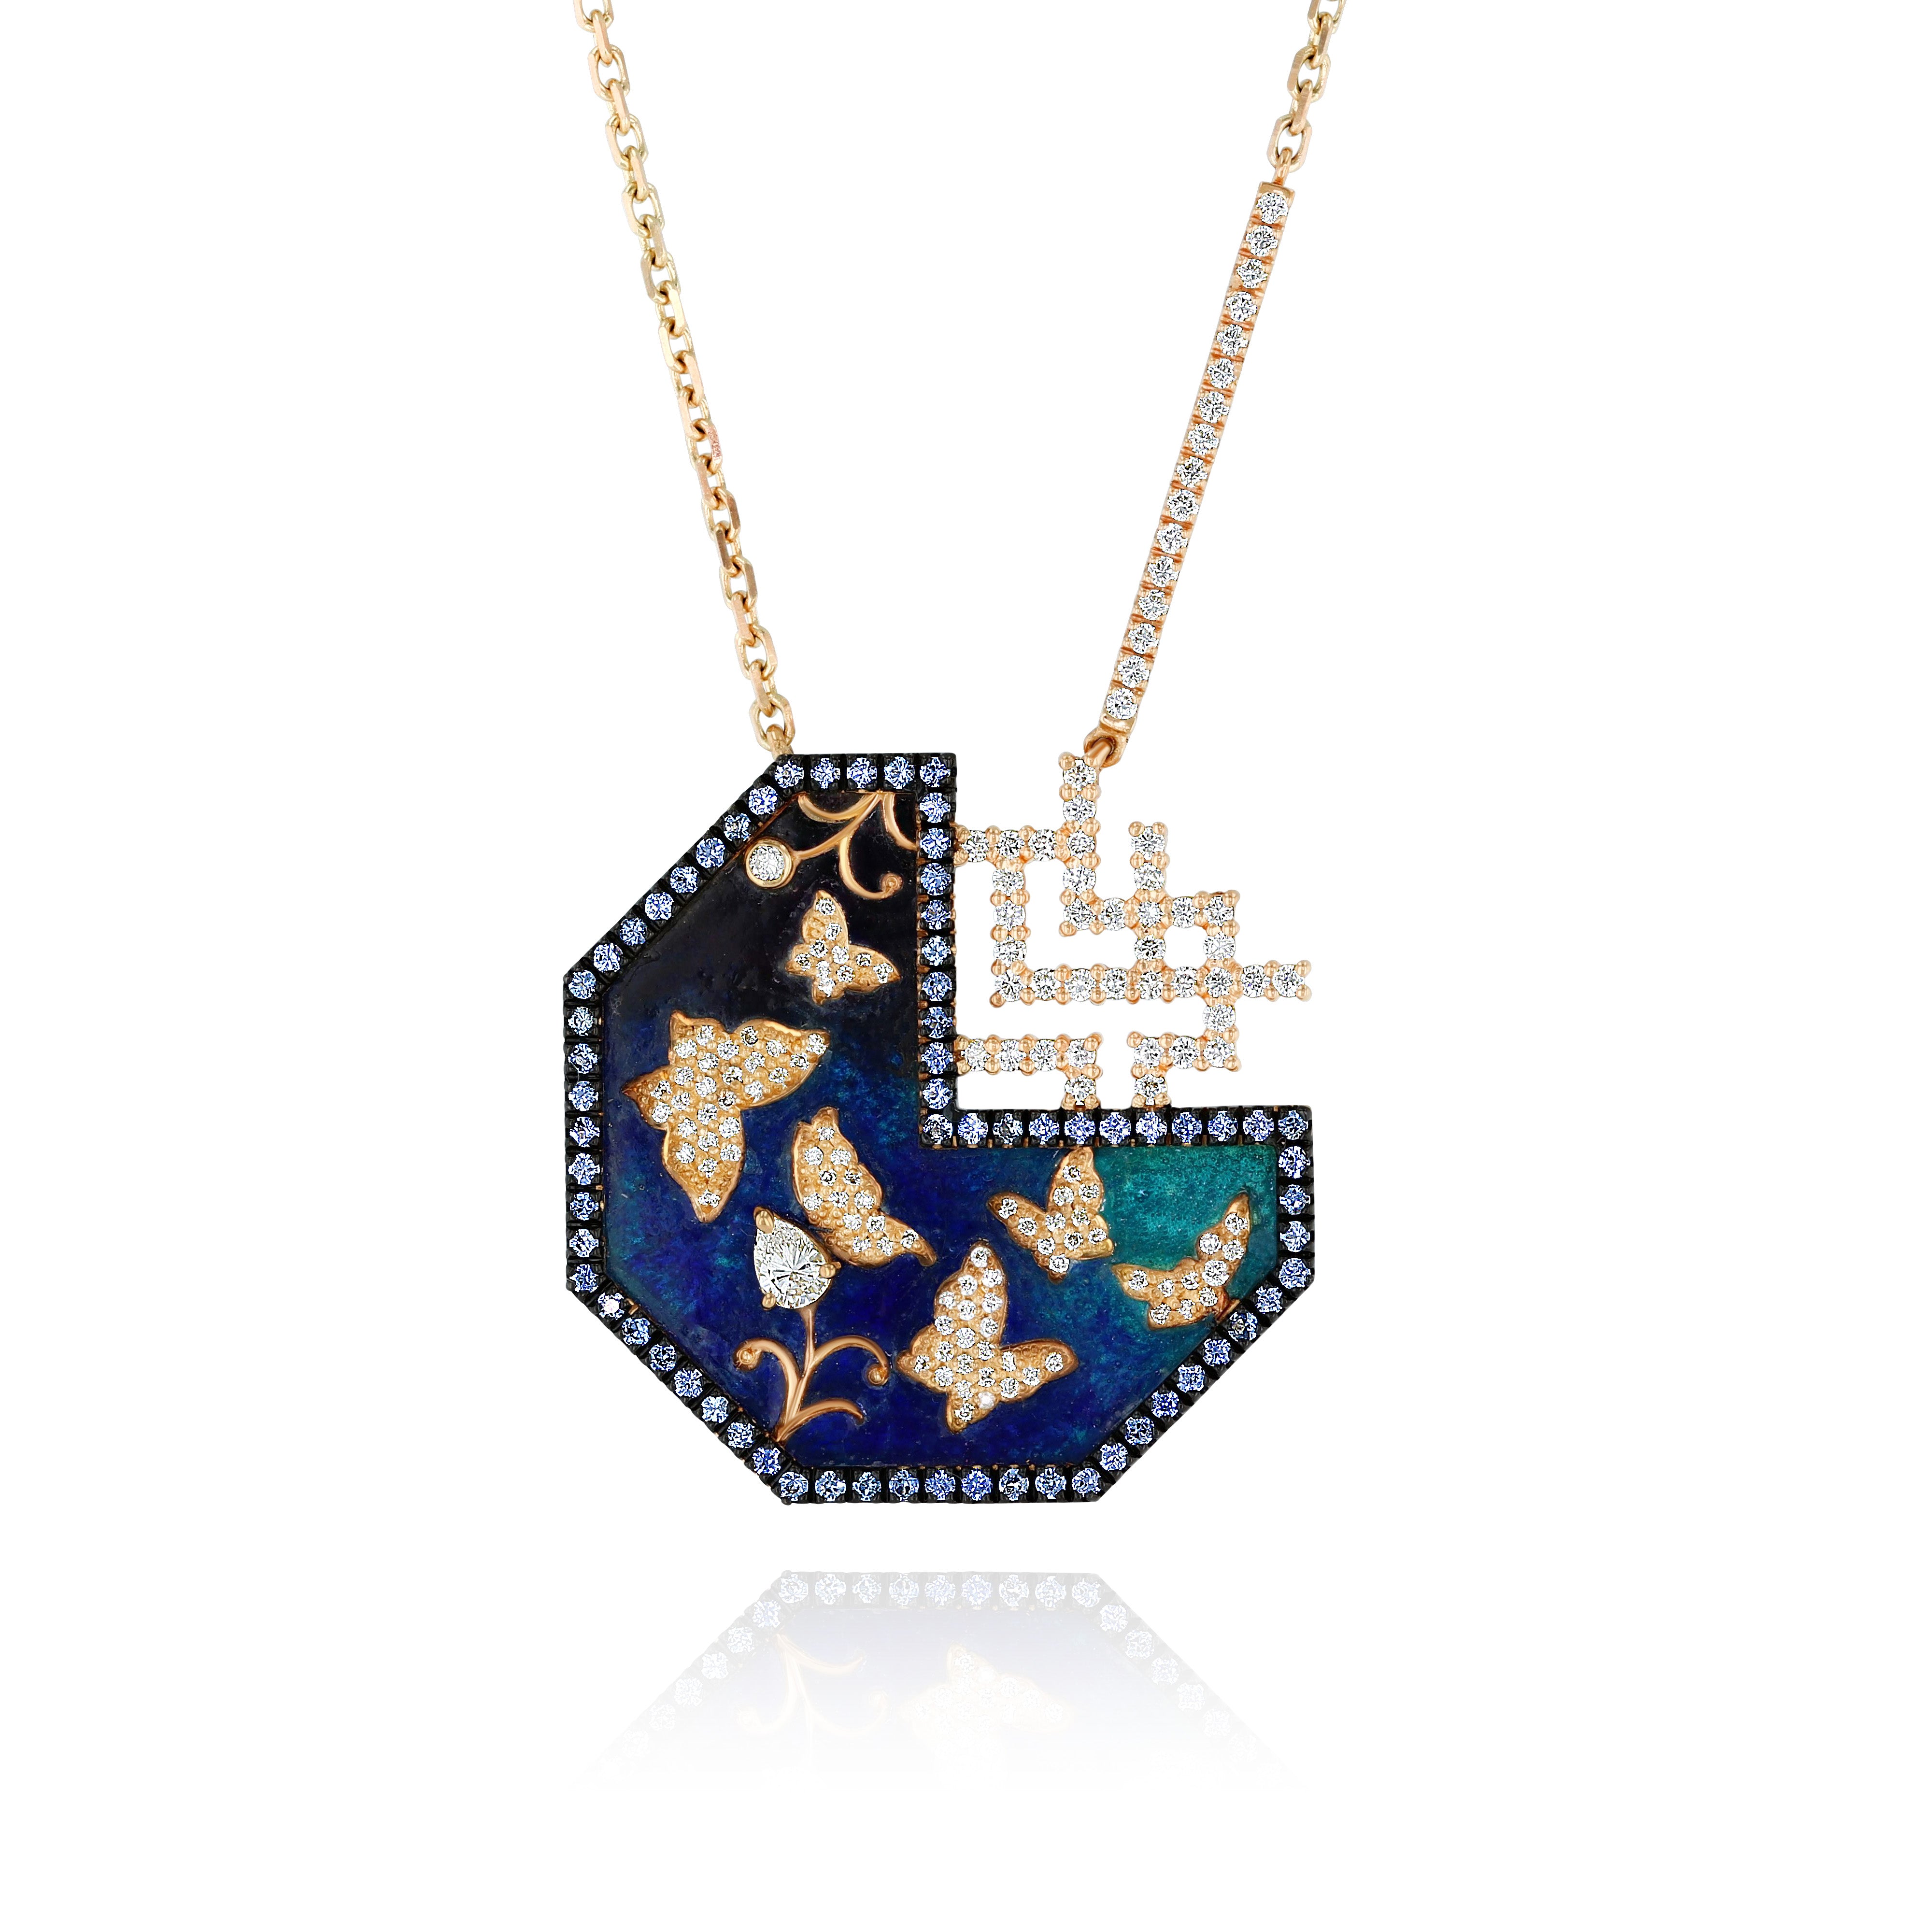 A Yellow Gold octagon shaped Necklace with Blue Cloisonne and butterflies of small Diamonds, Large